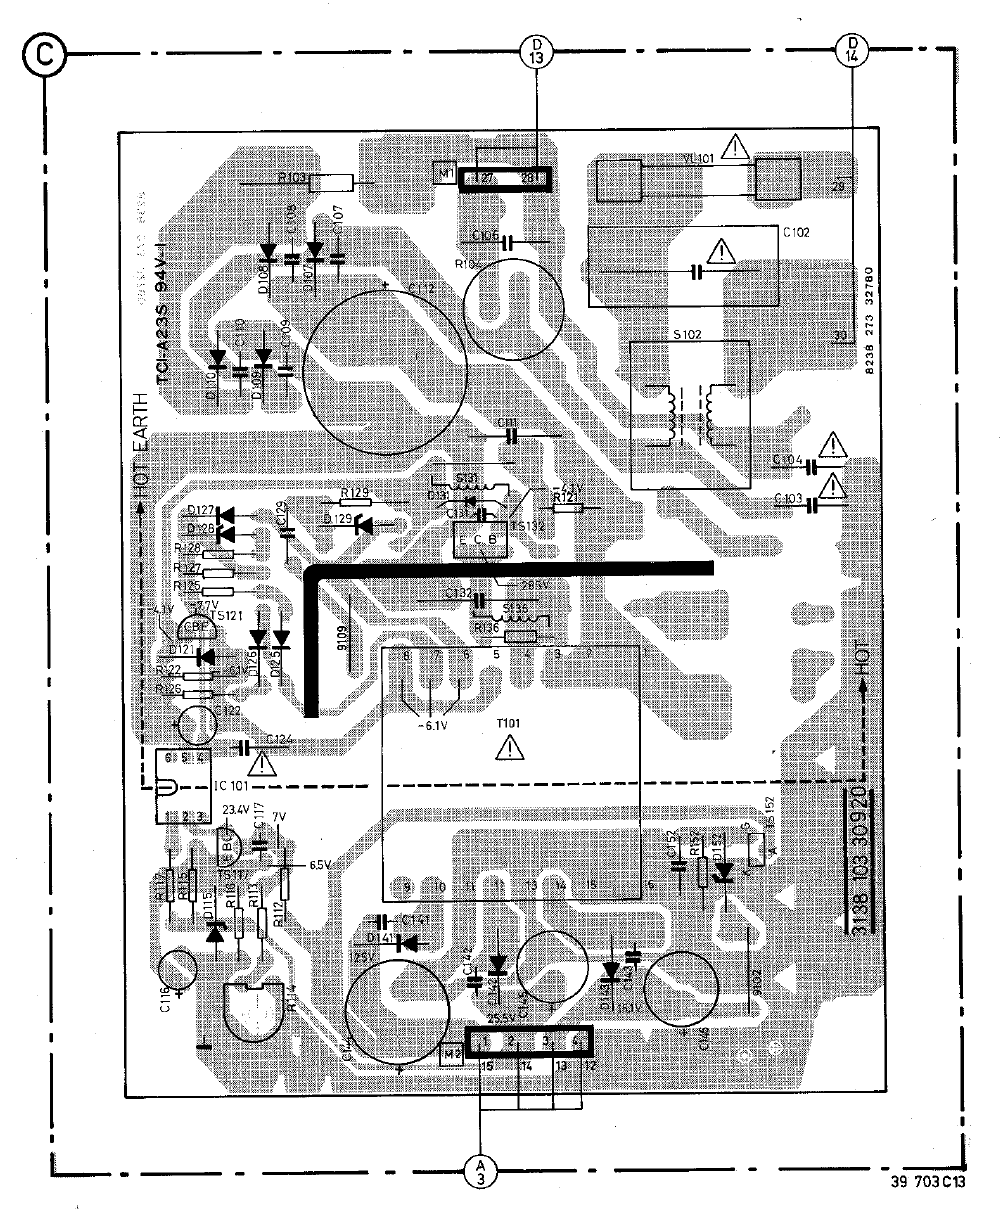 new_schematic2 PCB.png